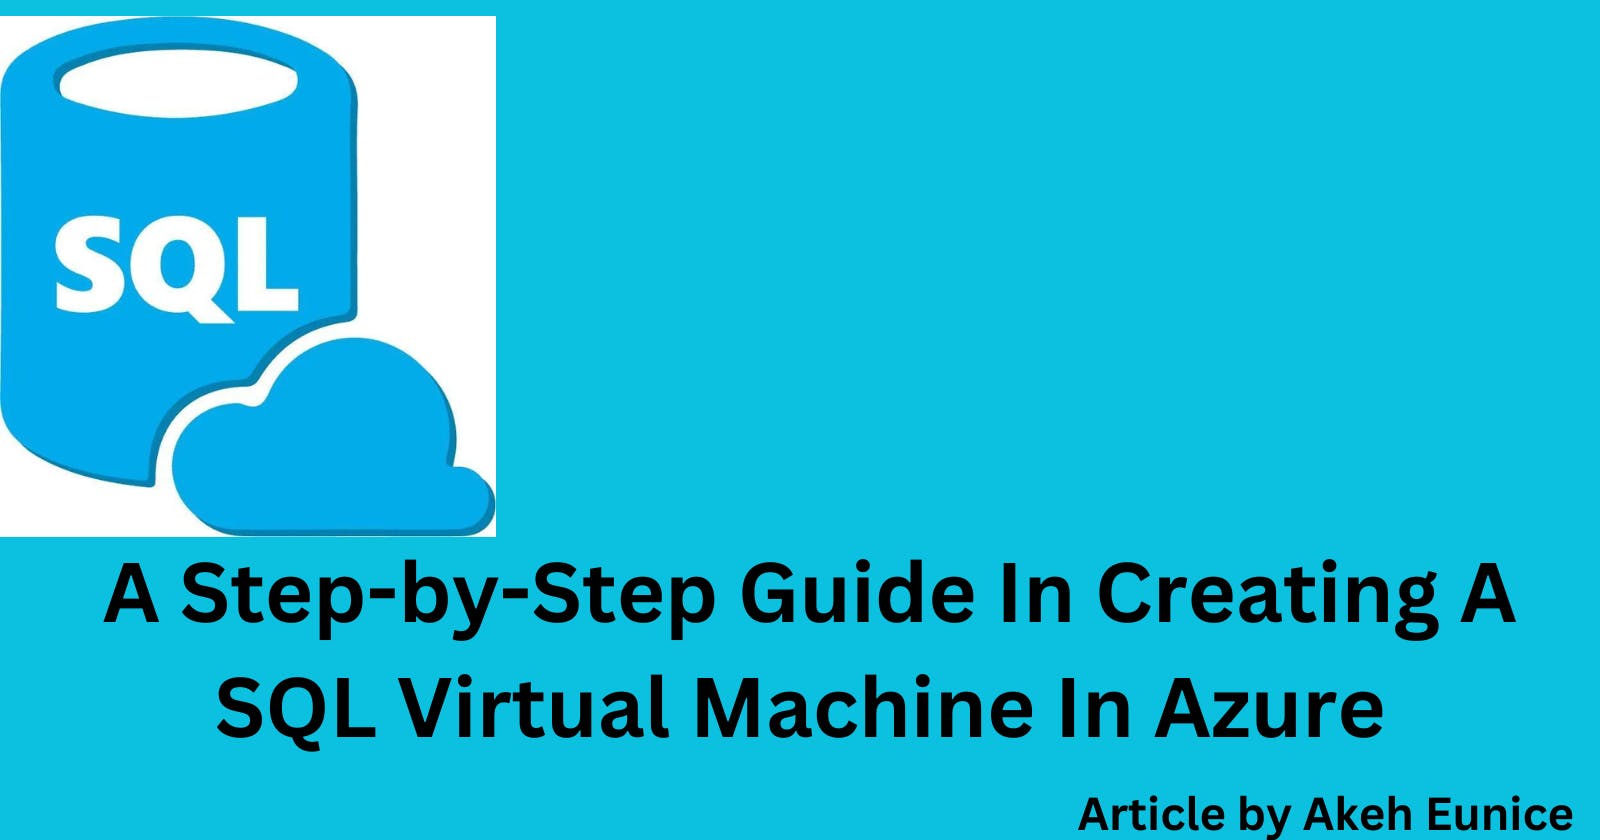 A Step-by-Step Guide In Creating A SQL Virtual Machine In Azure